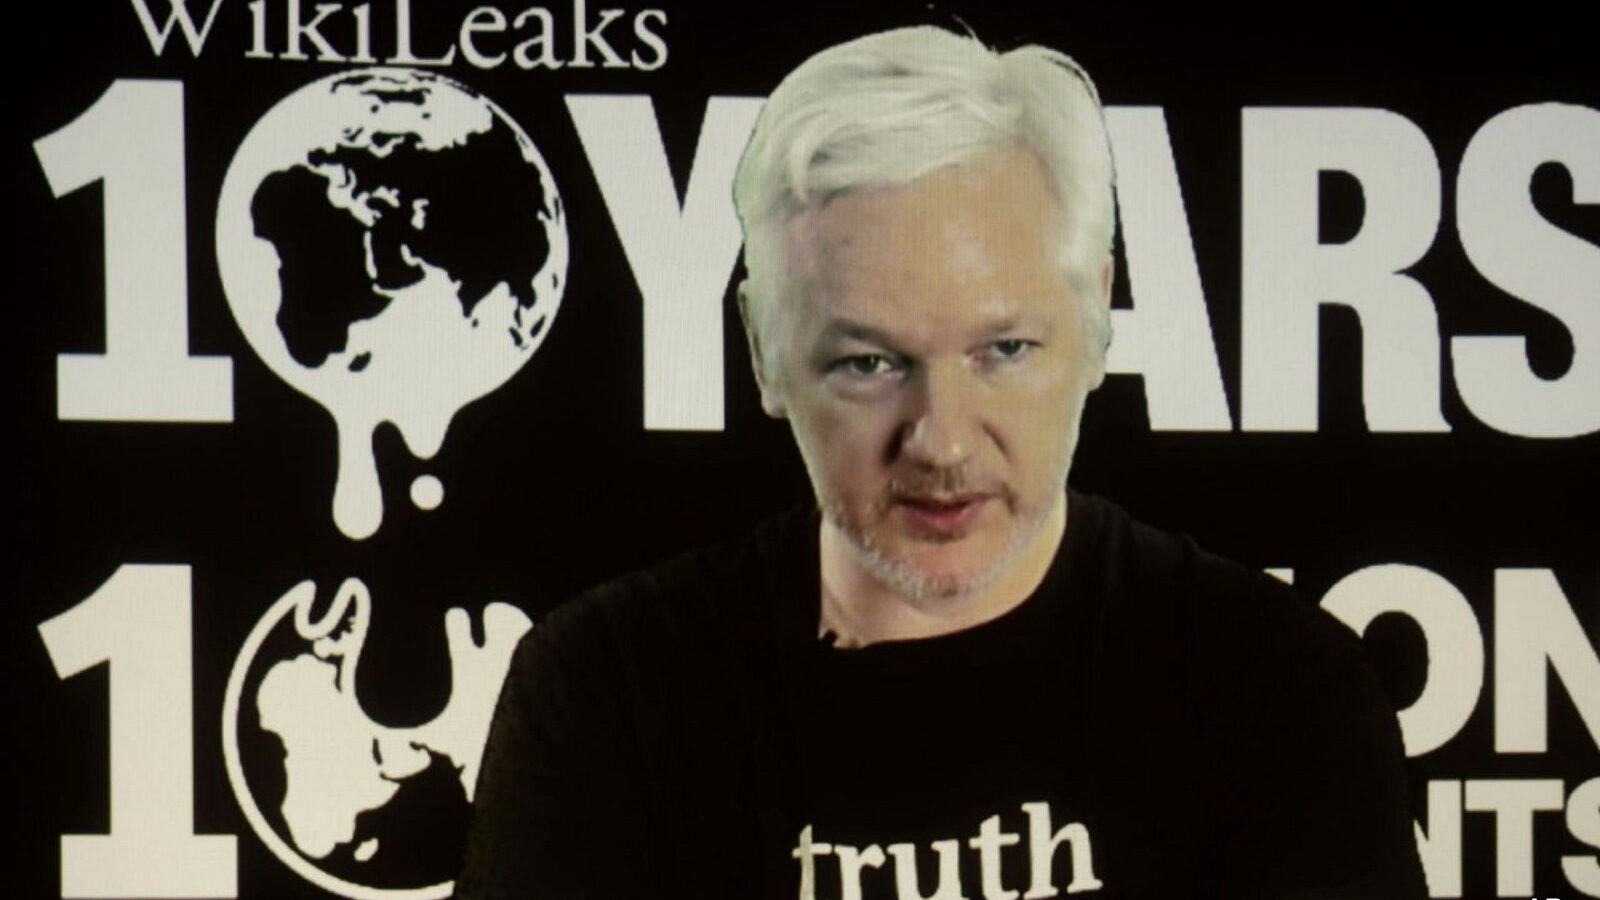 WikiLeaks founder Julian Assange participates via video link at a news conference marking the 10th anniversary of the secrecy-spilling group in Berlin. WikiLeaks said on Monday, Oct. 17, 2016, that Assange's internet access has been cut by an unidentified state actor.